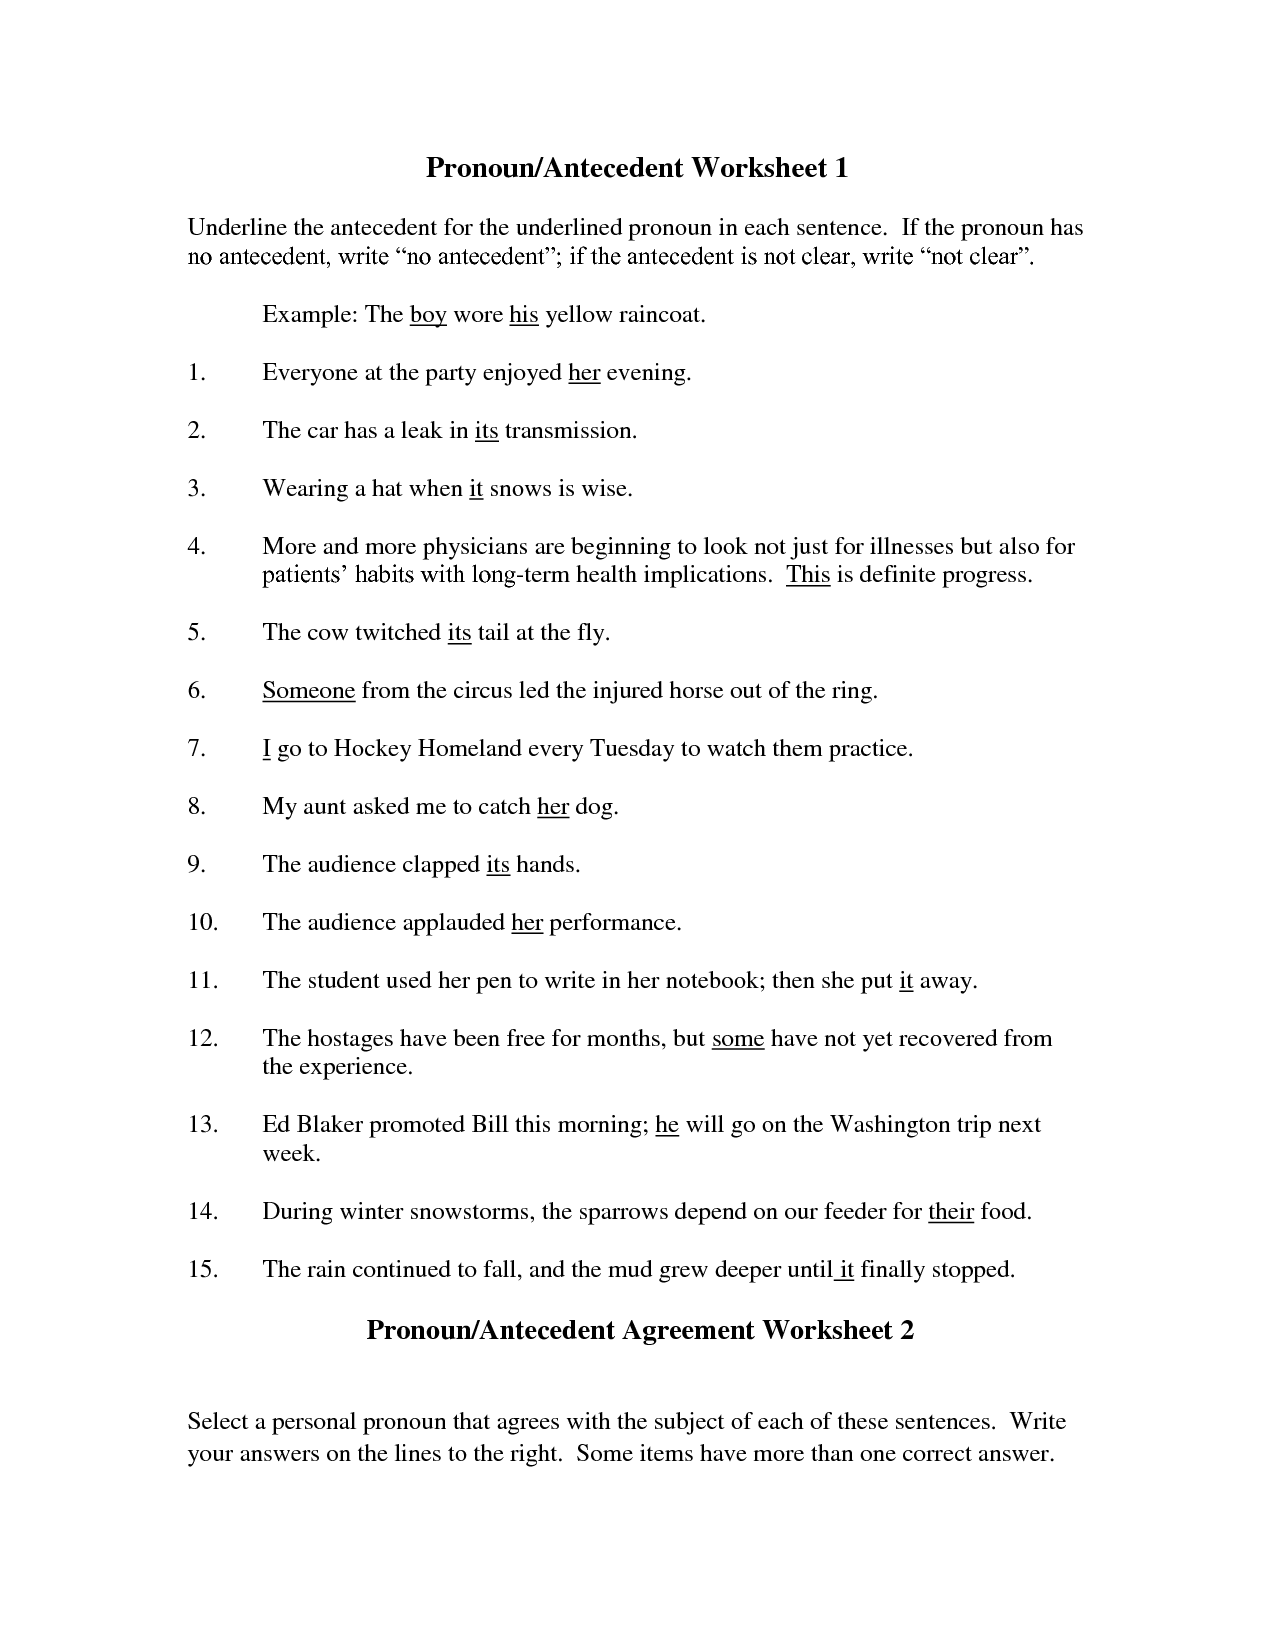 8-best-images-of-pronoun-and-antecedent-agreement-worksheets-pronoun-antecedent-agreement